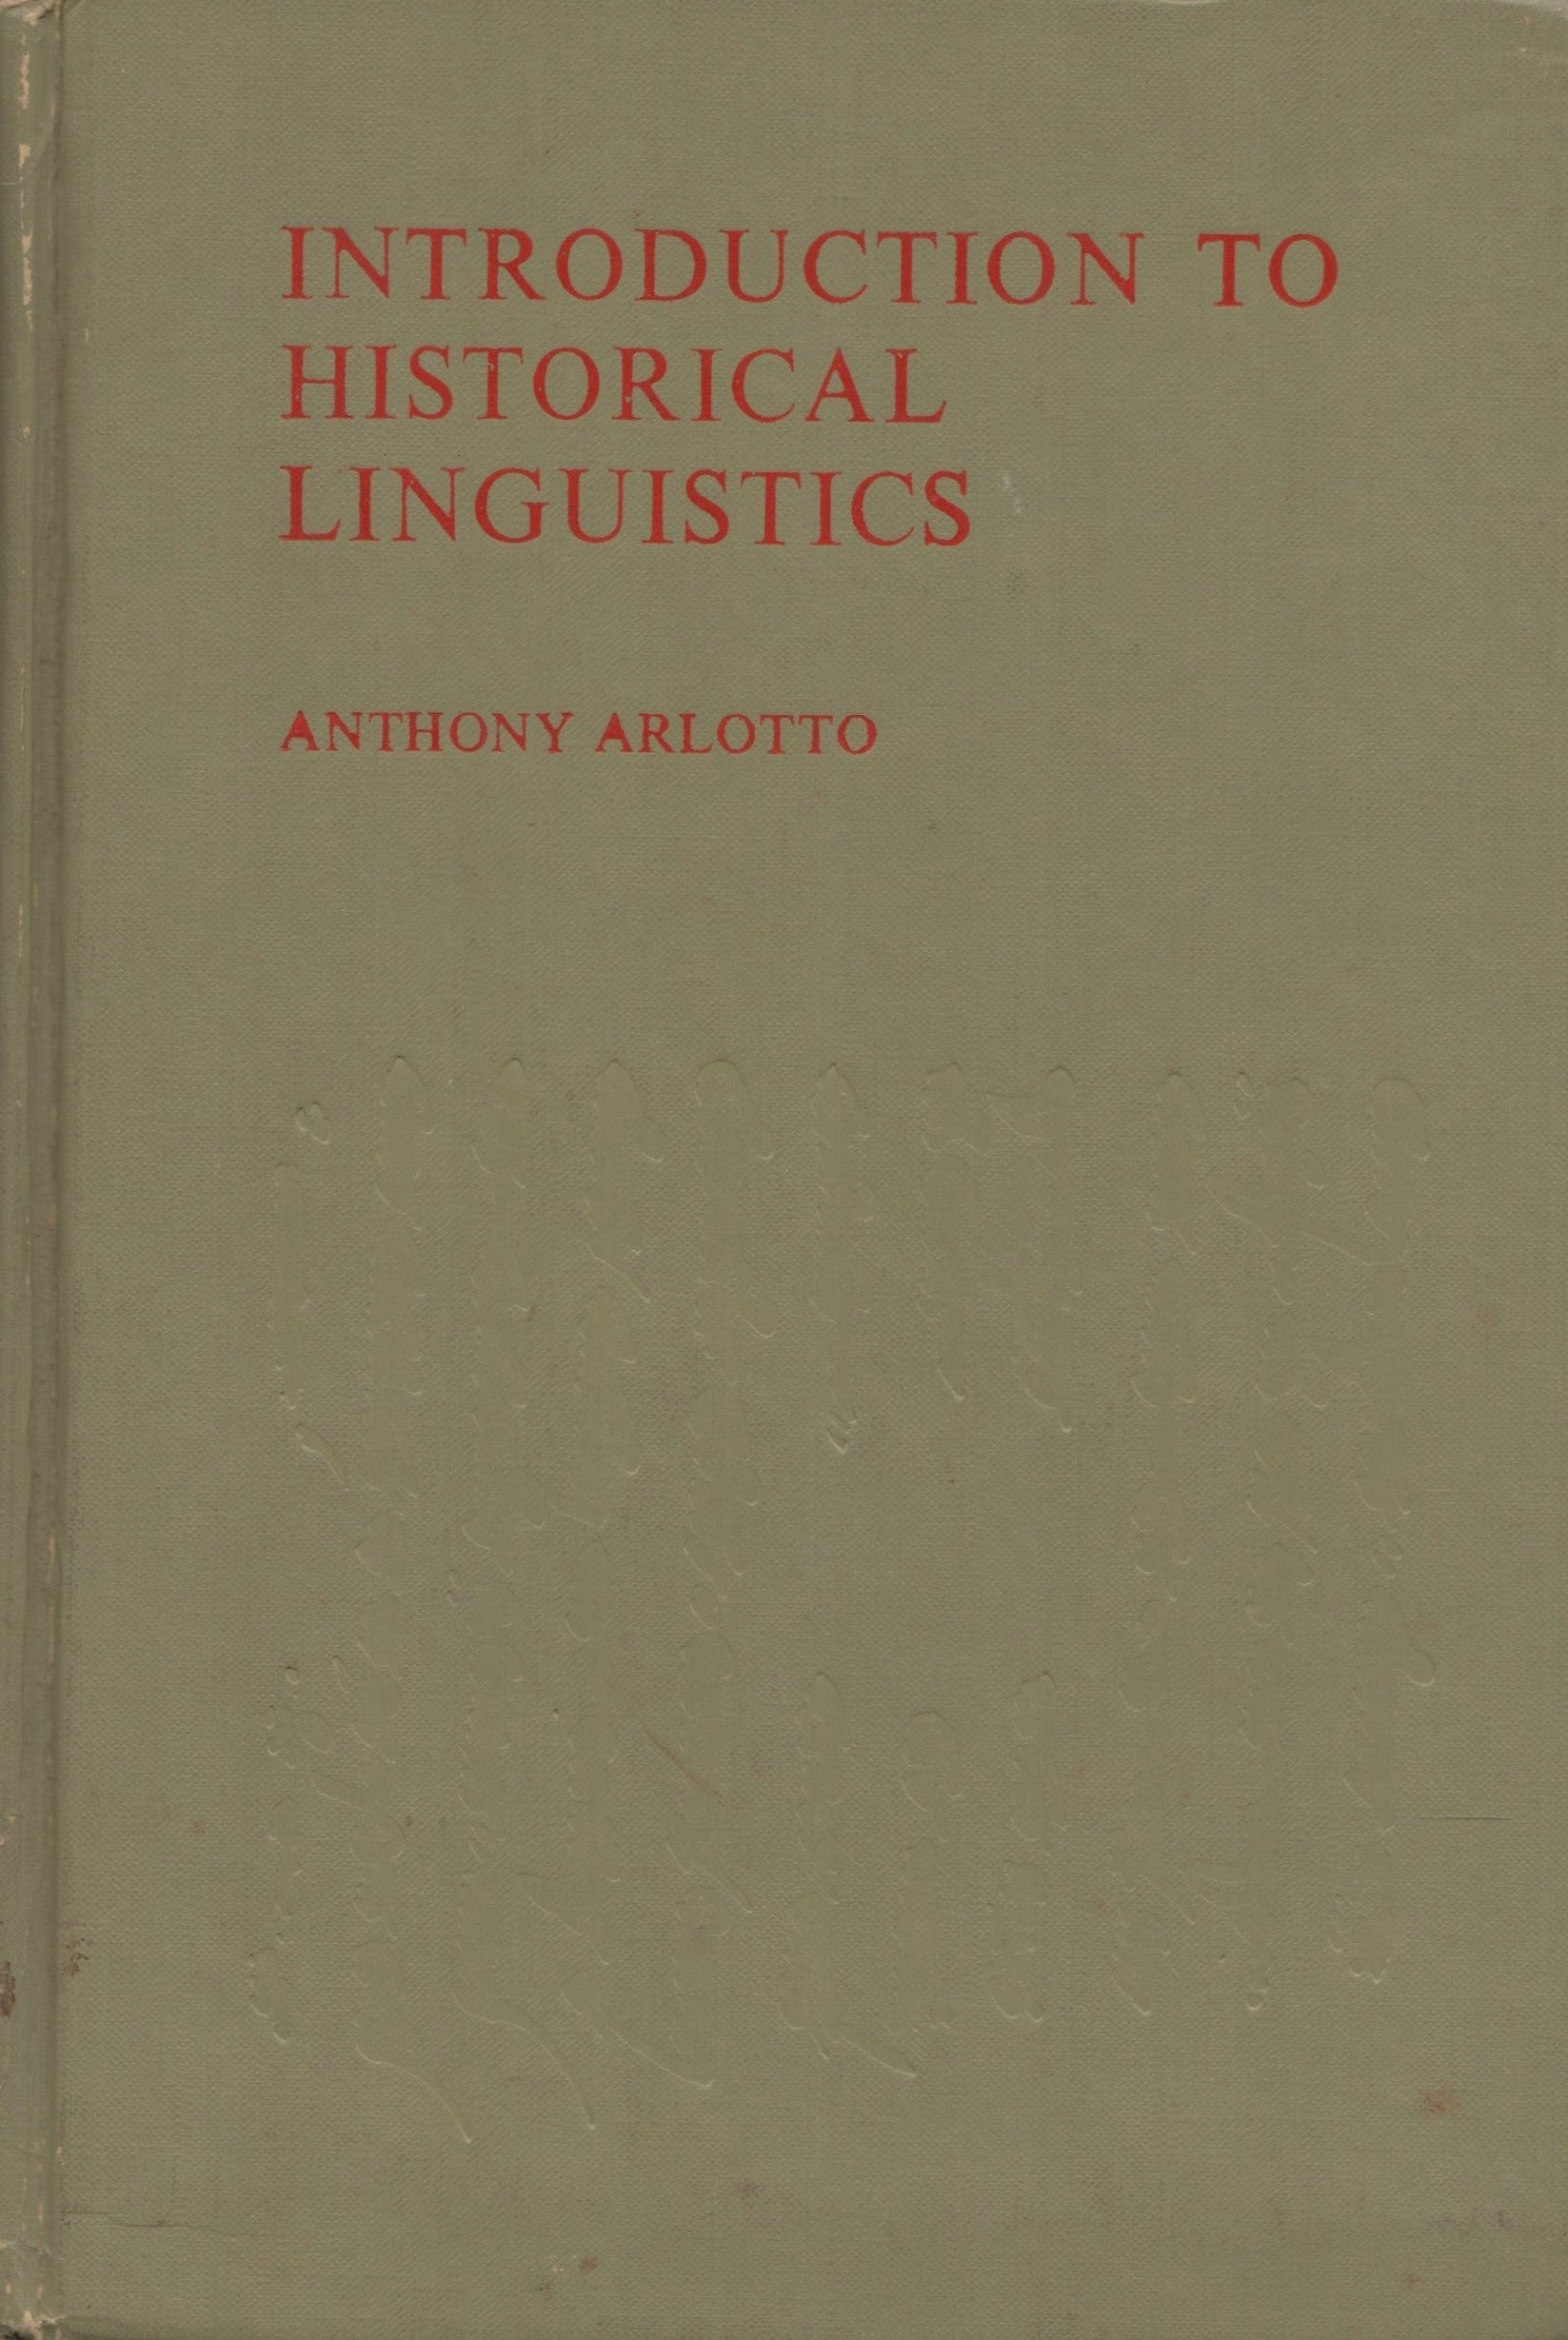 ARLOTTO, ANTHONY. Introduction to historical linguistics